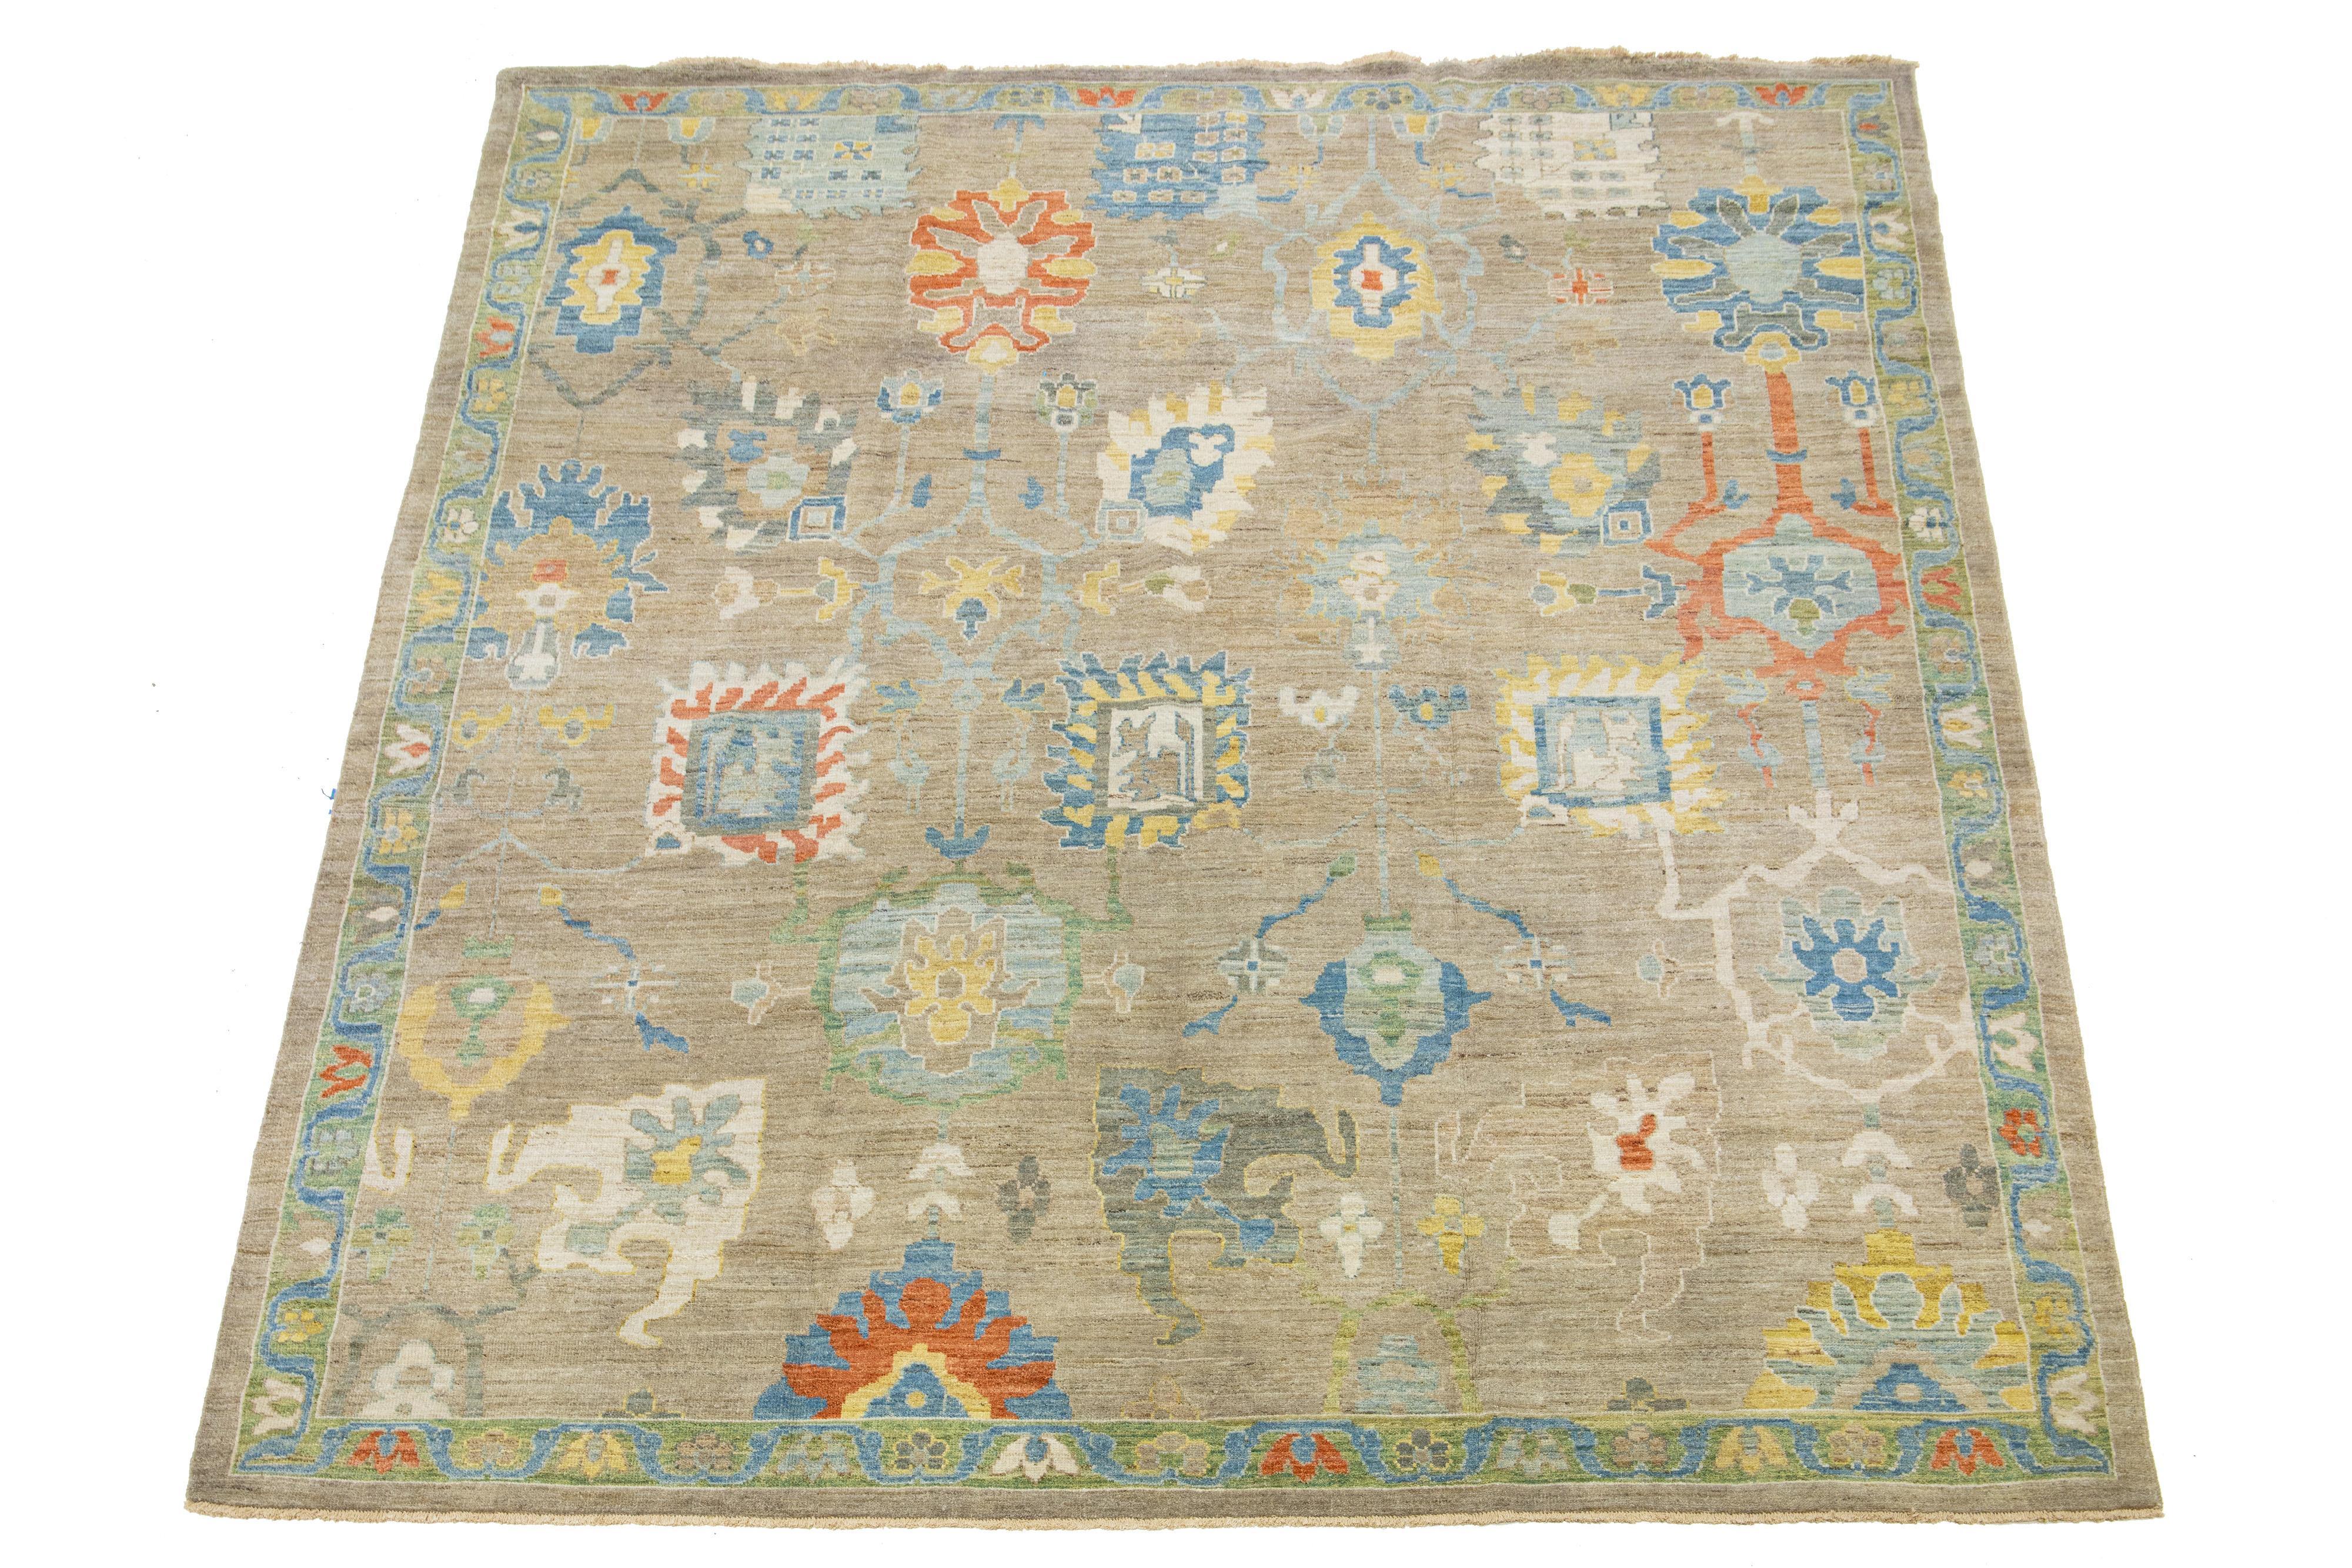 Beautiful modern Sultanabad hand-knotted wool rug with a light brown field. This Sultanabad rug has beige, Orange, Yellow, and blue accents in a gorgeous classic floral pattern.

This rug measures 10'2